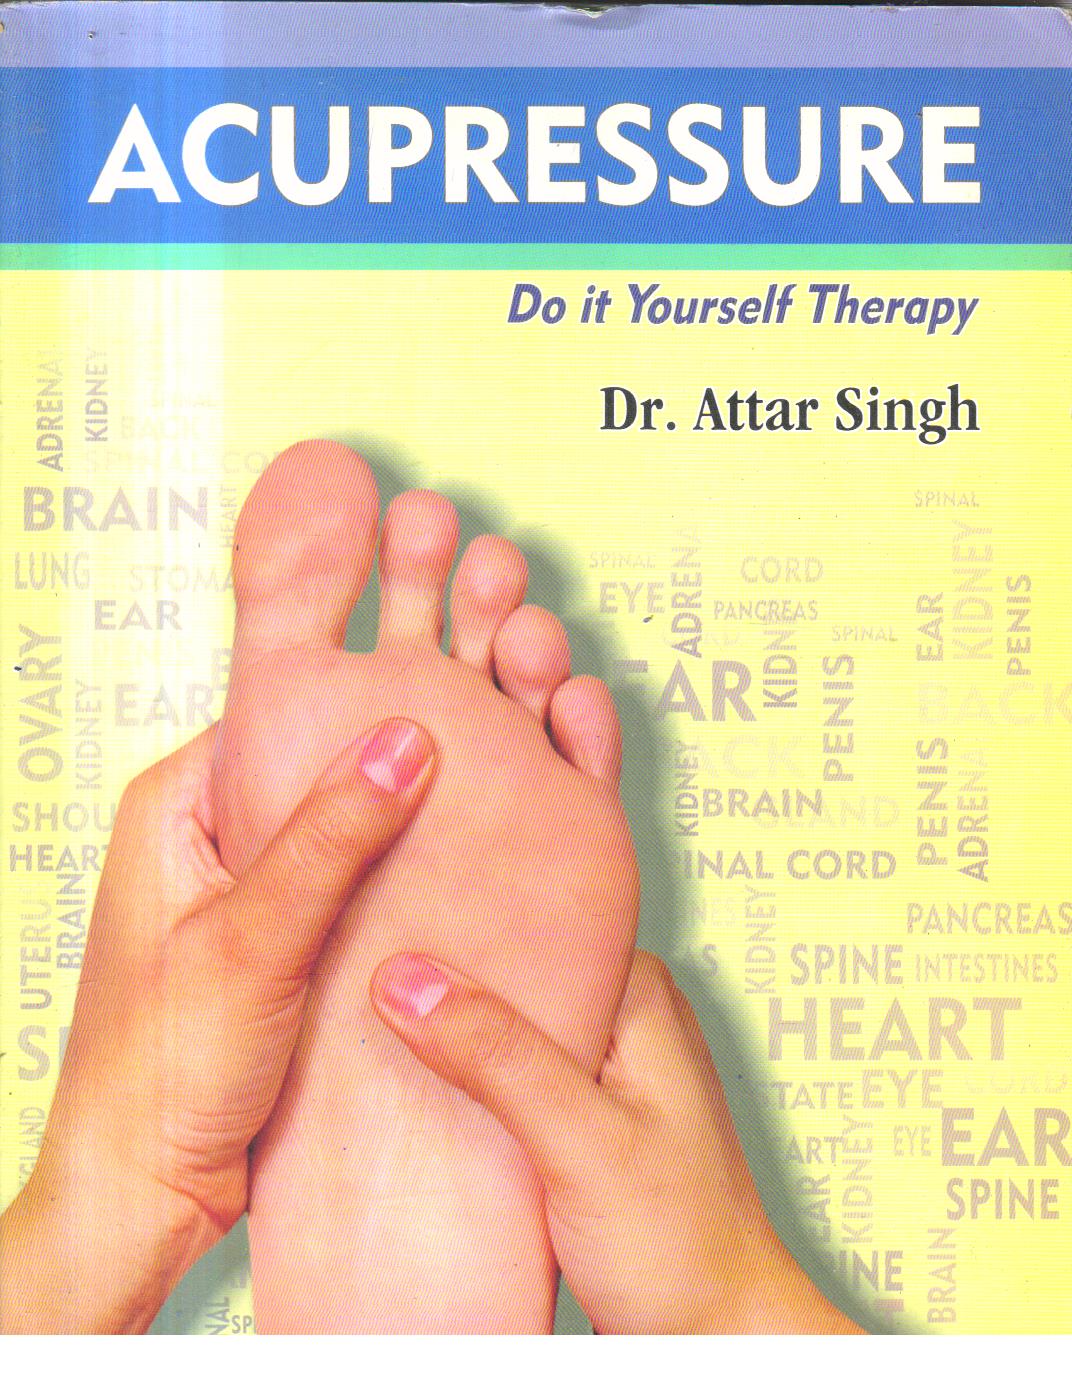 Acupressure Do it Yourself Therapy